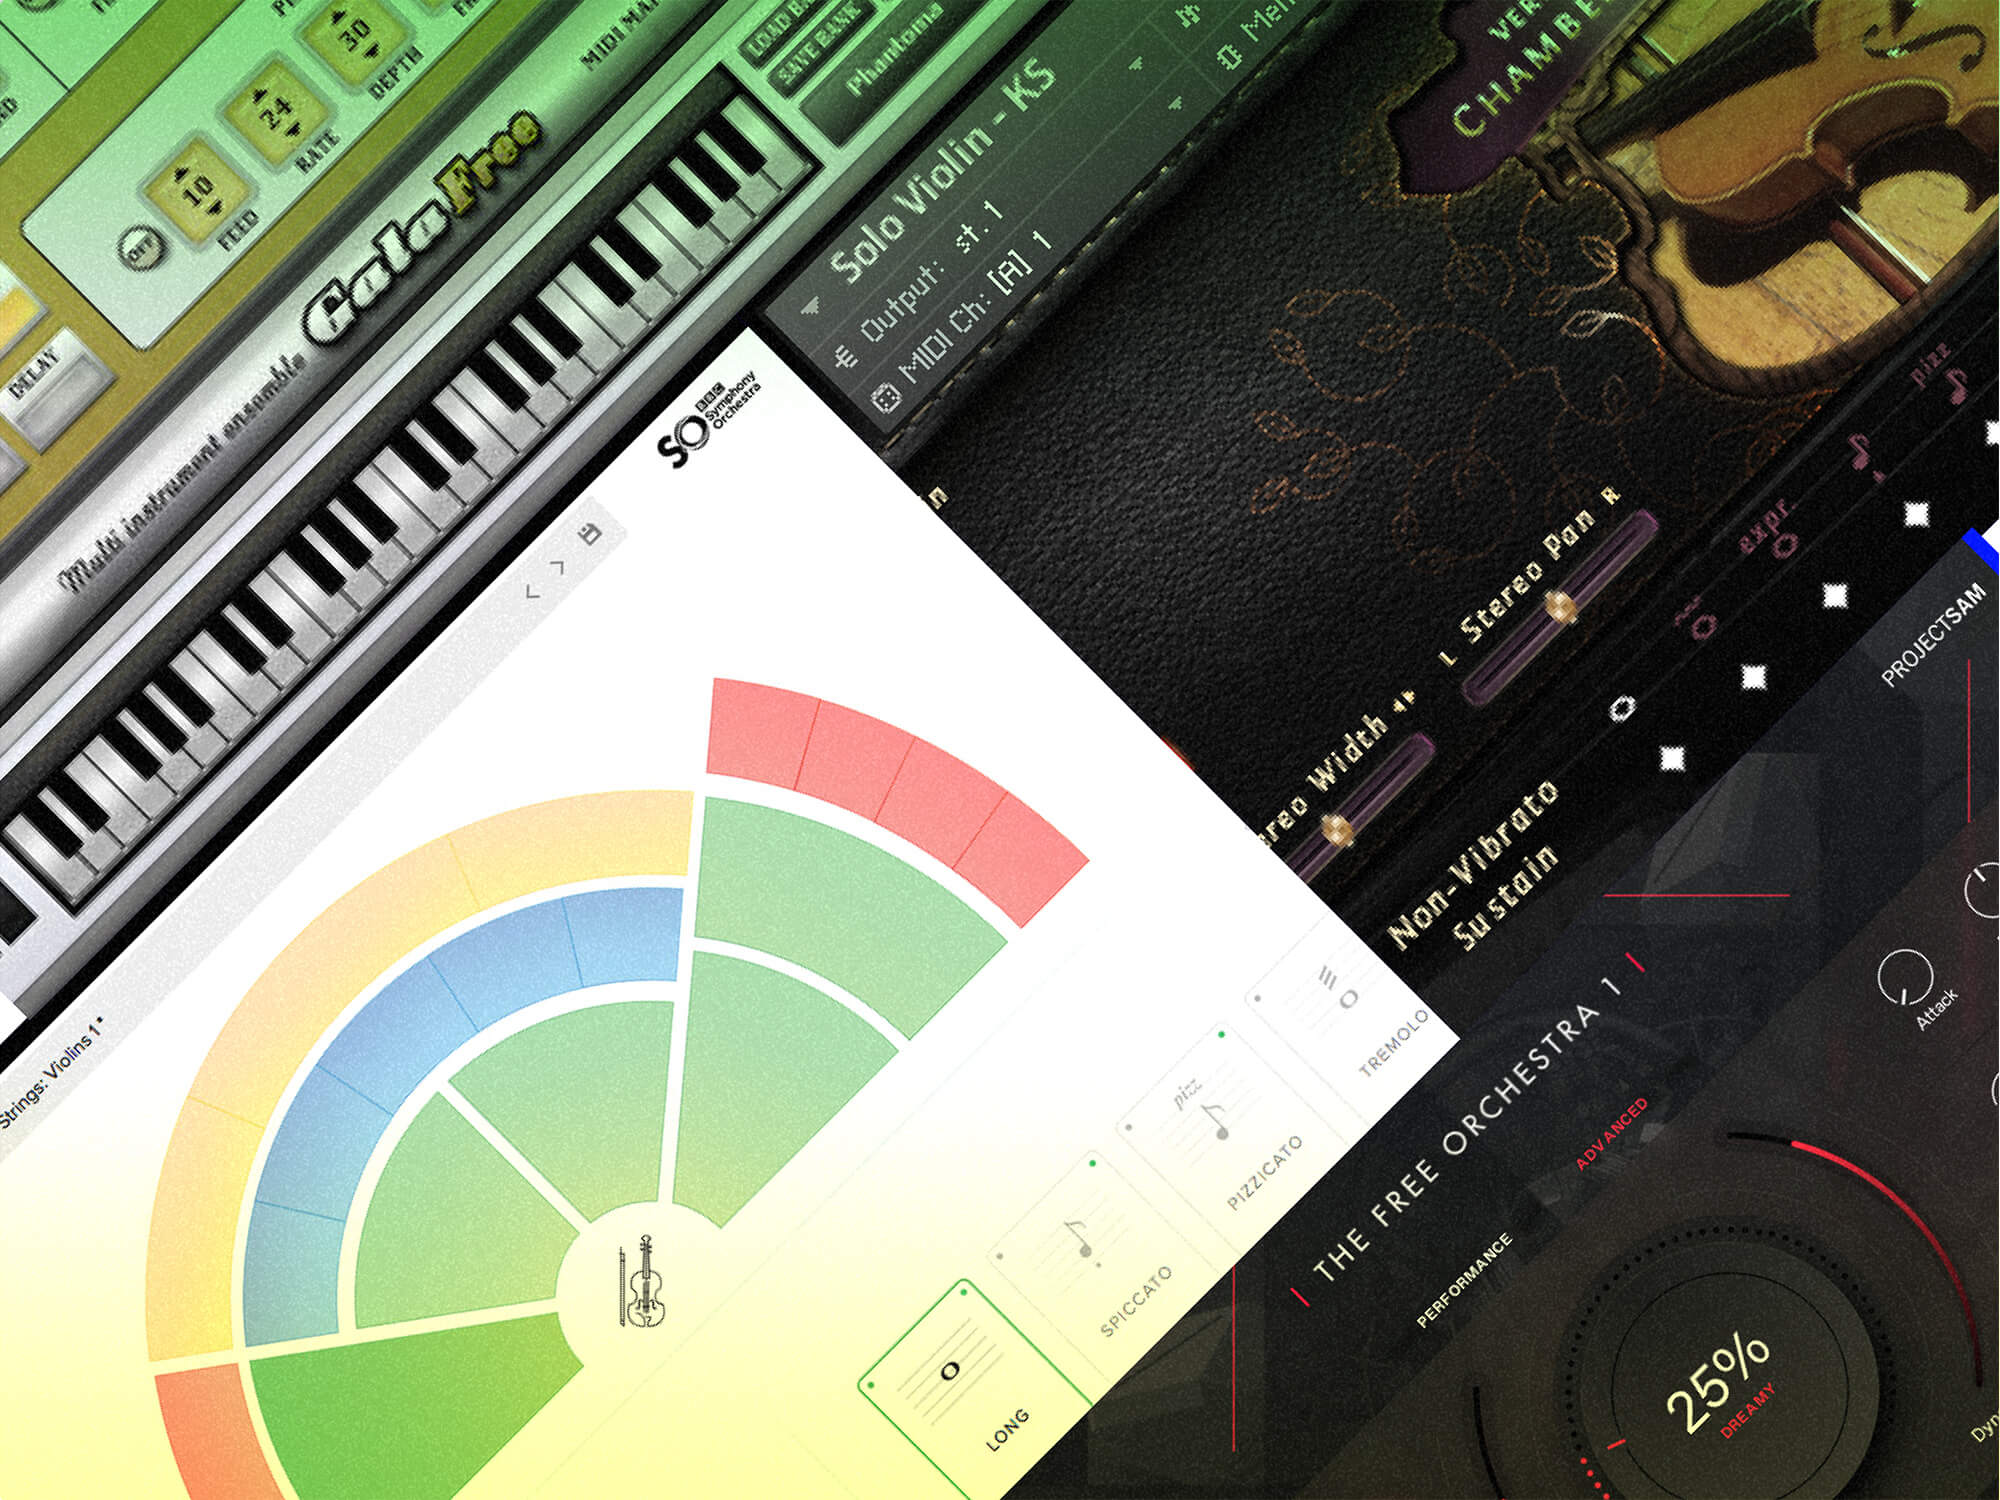 Best Orchestral Virtual Libraries